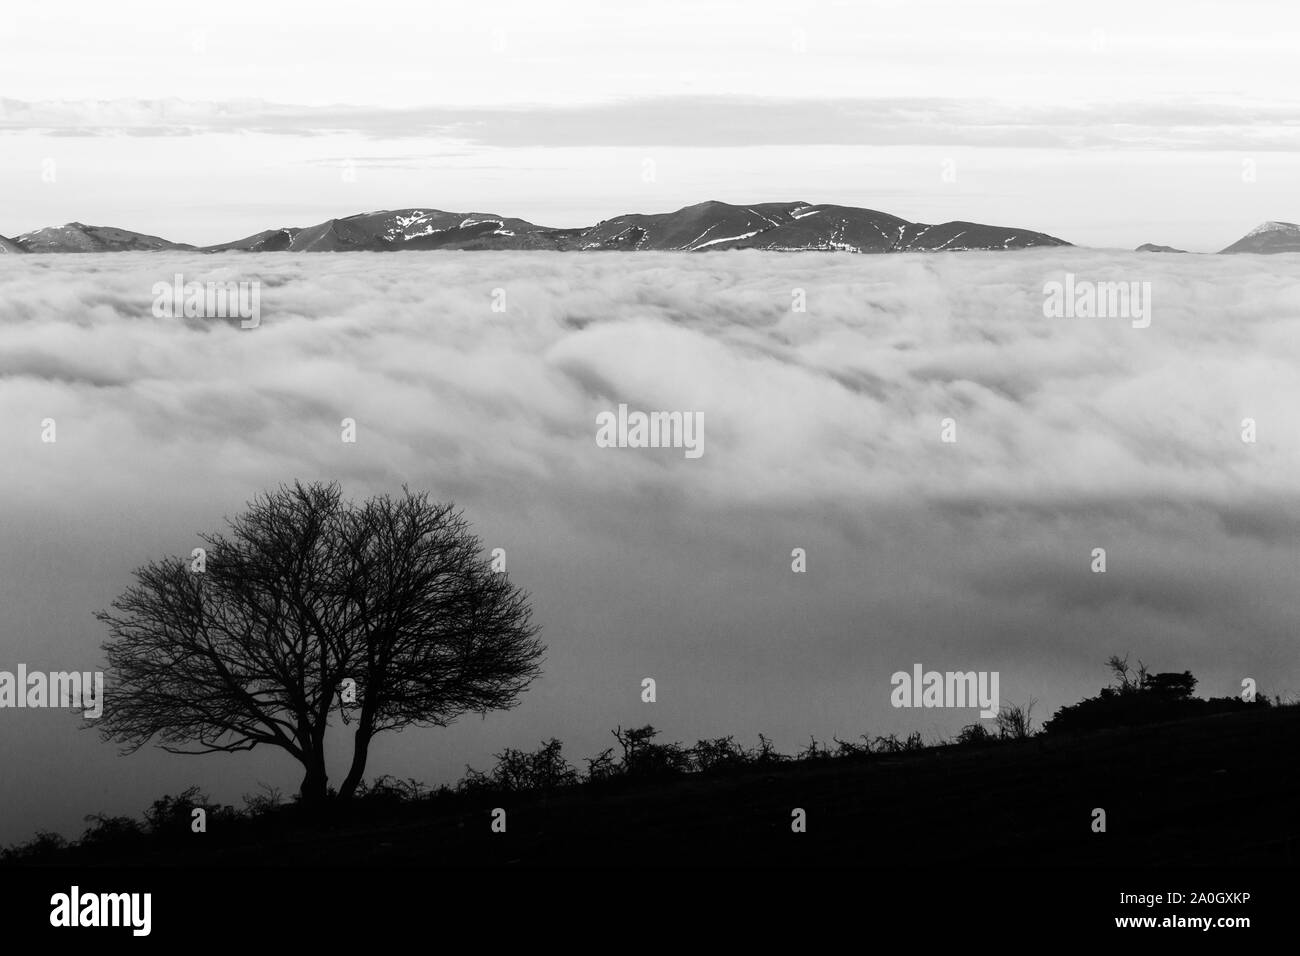 A tree silhouette above a sea of fog and mountains with snow at the distance Stock Photo